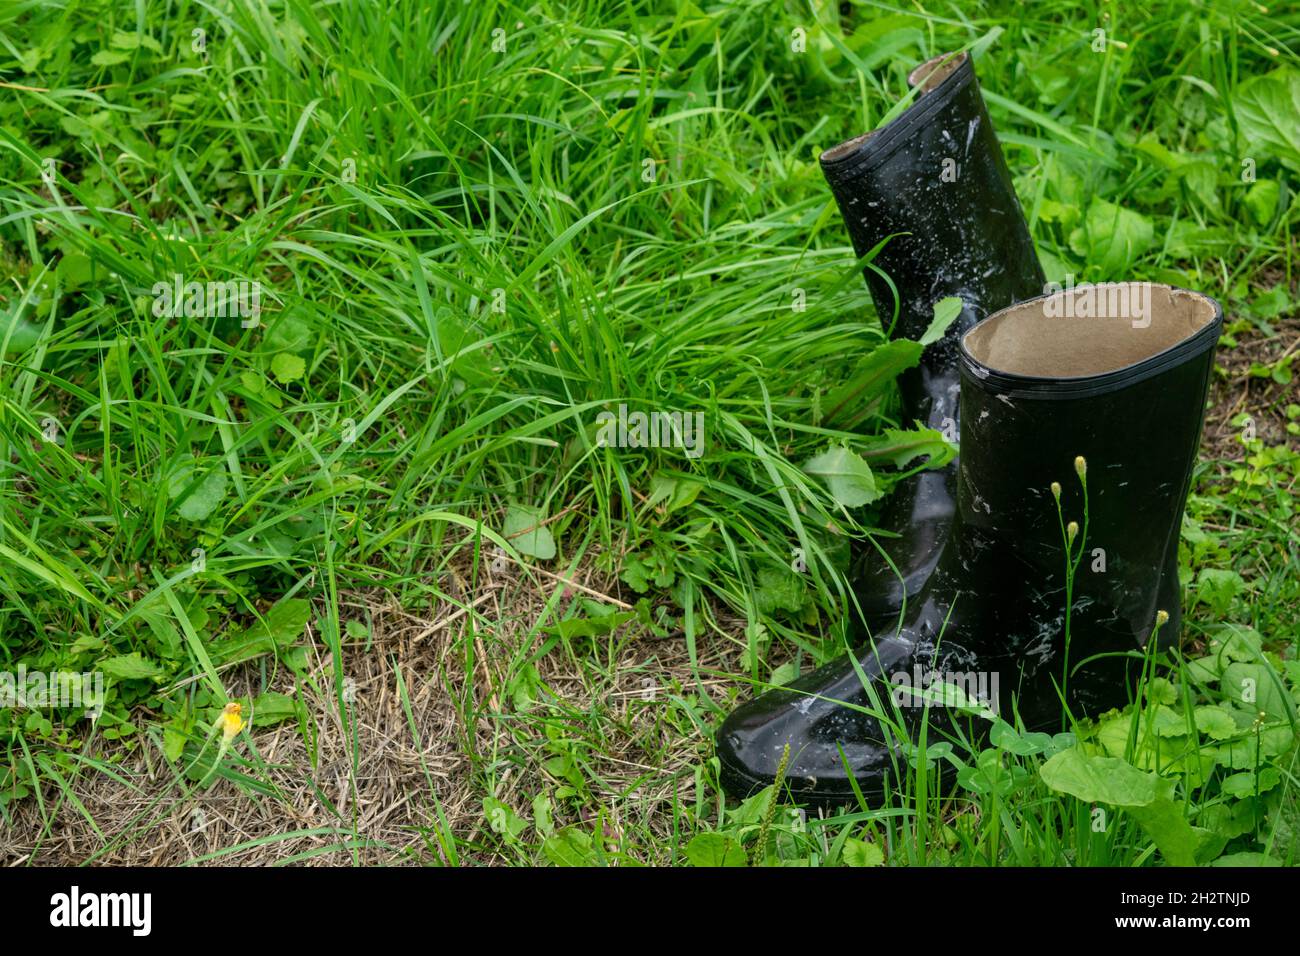 A pair of black rubber boots in the green gras Stock Photo